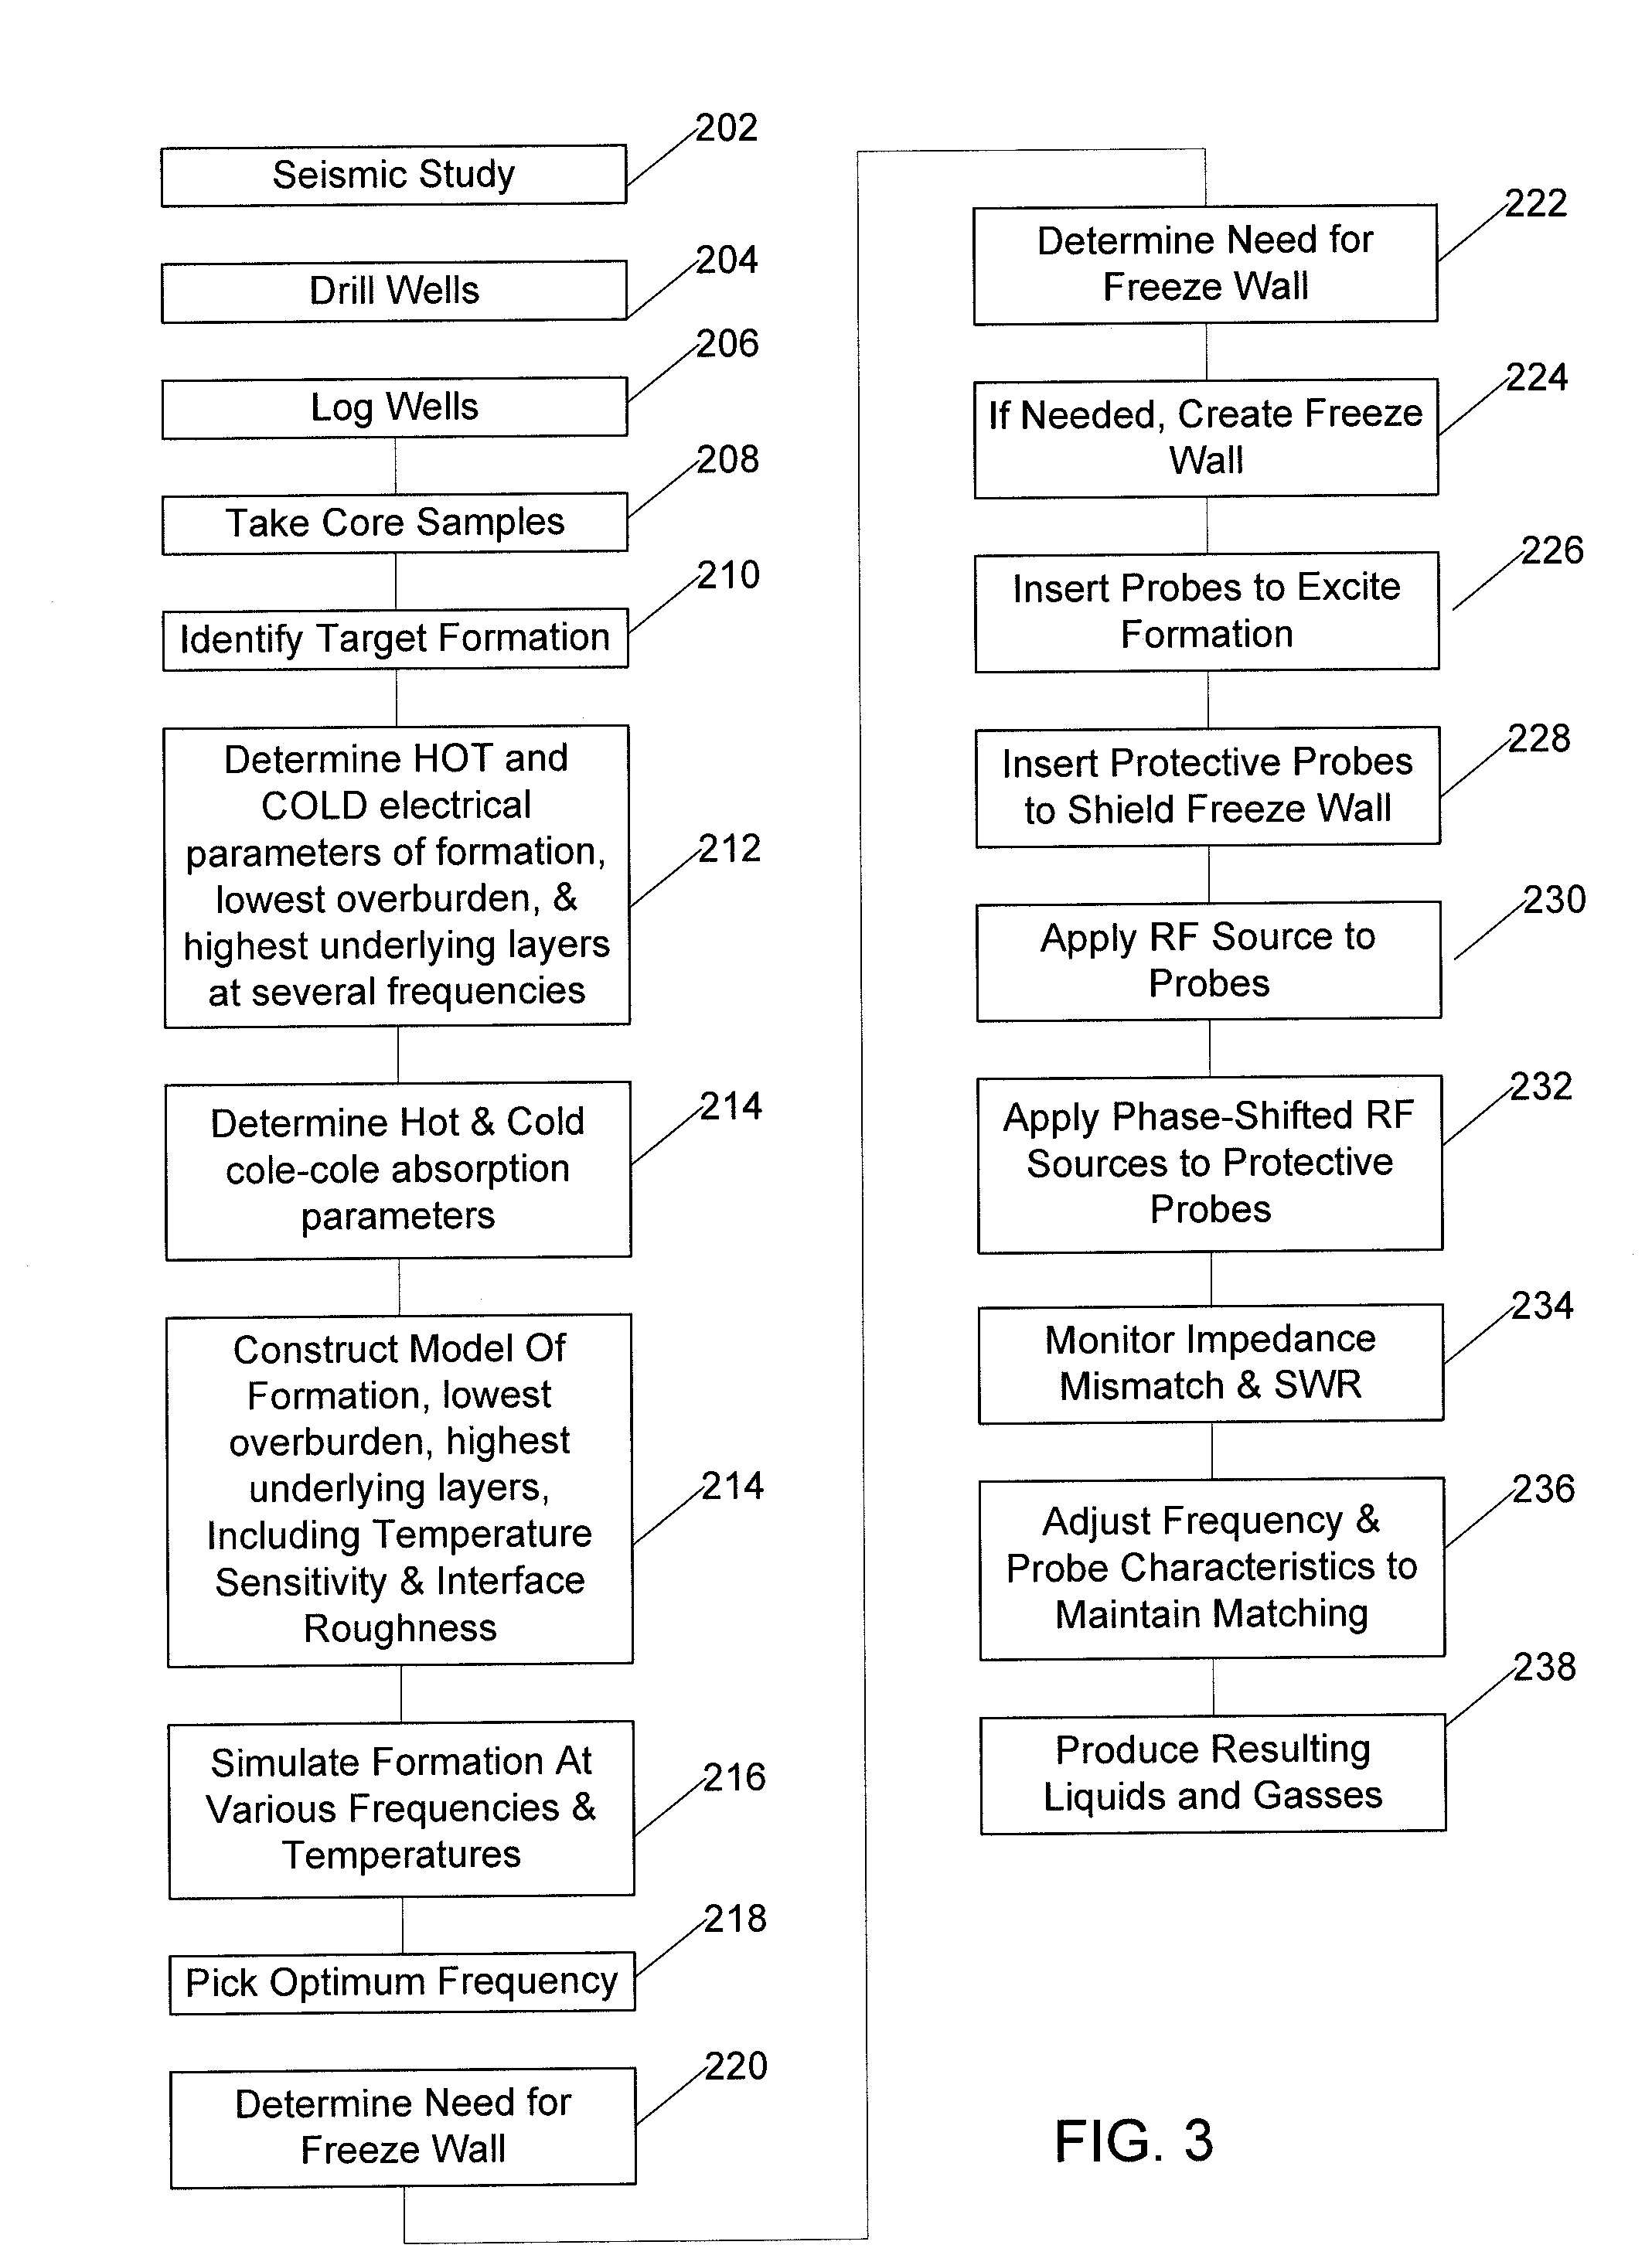 System and method for extraction of hydrocarbons by in-situ radio frequency heating of carbon bearing geological formations